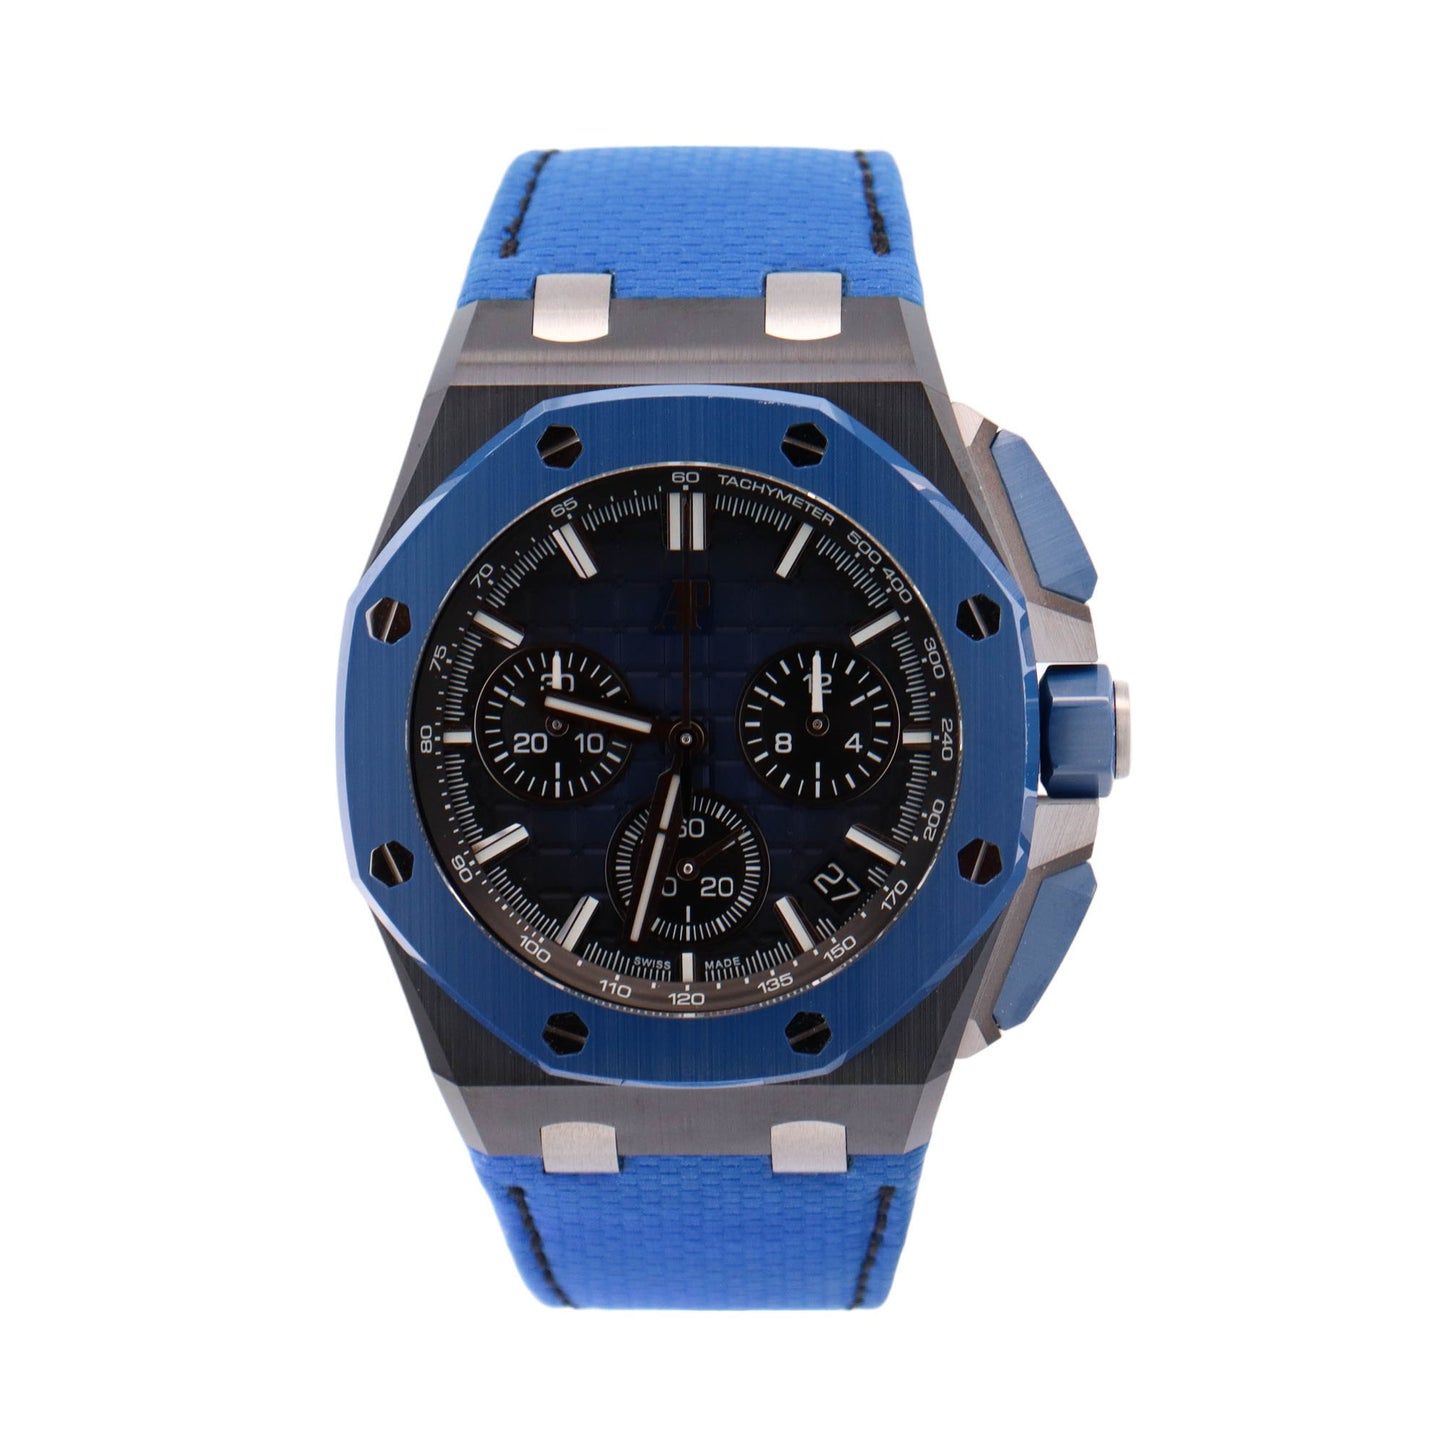 Audemars Piguet Royal Oak Offshore Ceramic 43mm Blue Chronograph Dial Watch Reference# 26420CE.OO.A043VE.01 - Happy Jewelers Fine Jewelry Lifetime Warranty